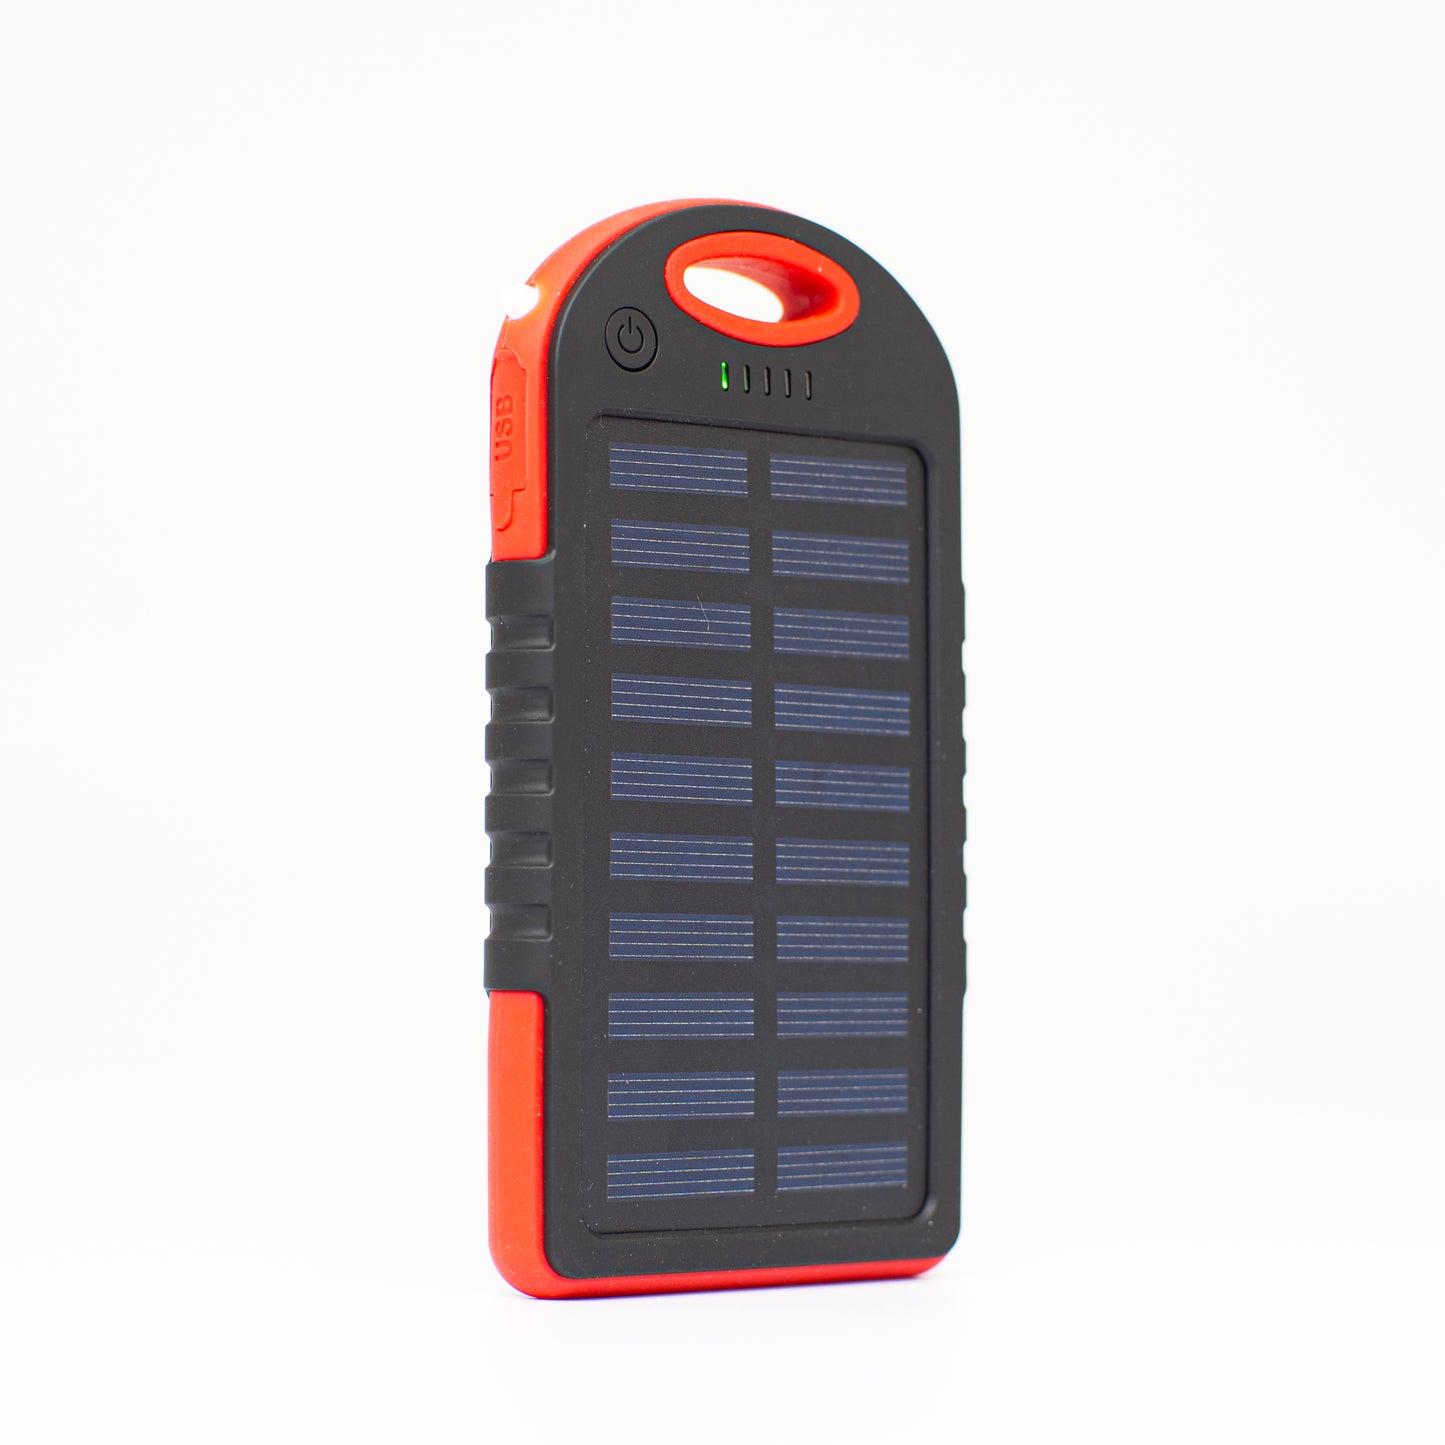 Solar power bank Premium solar panel with power bank, lamp and 2x USB Out - charging directly with the sun for emergency power